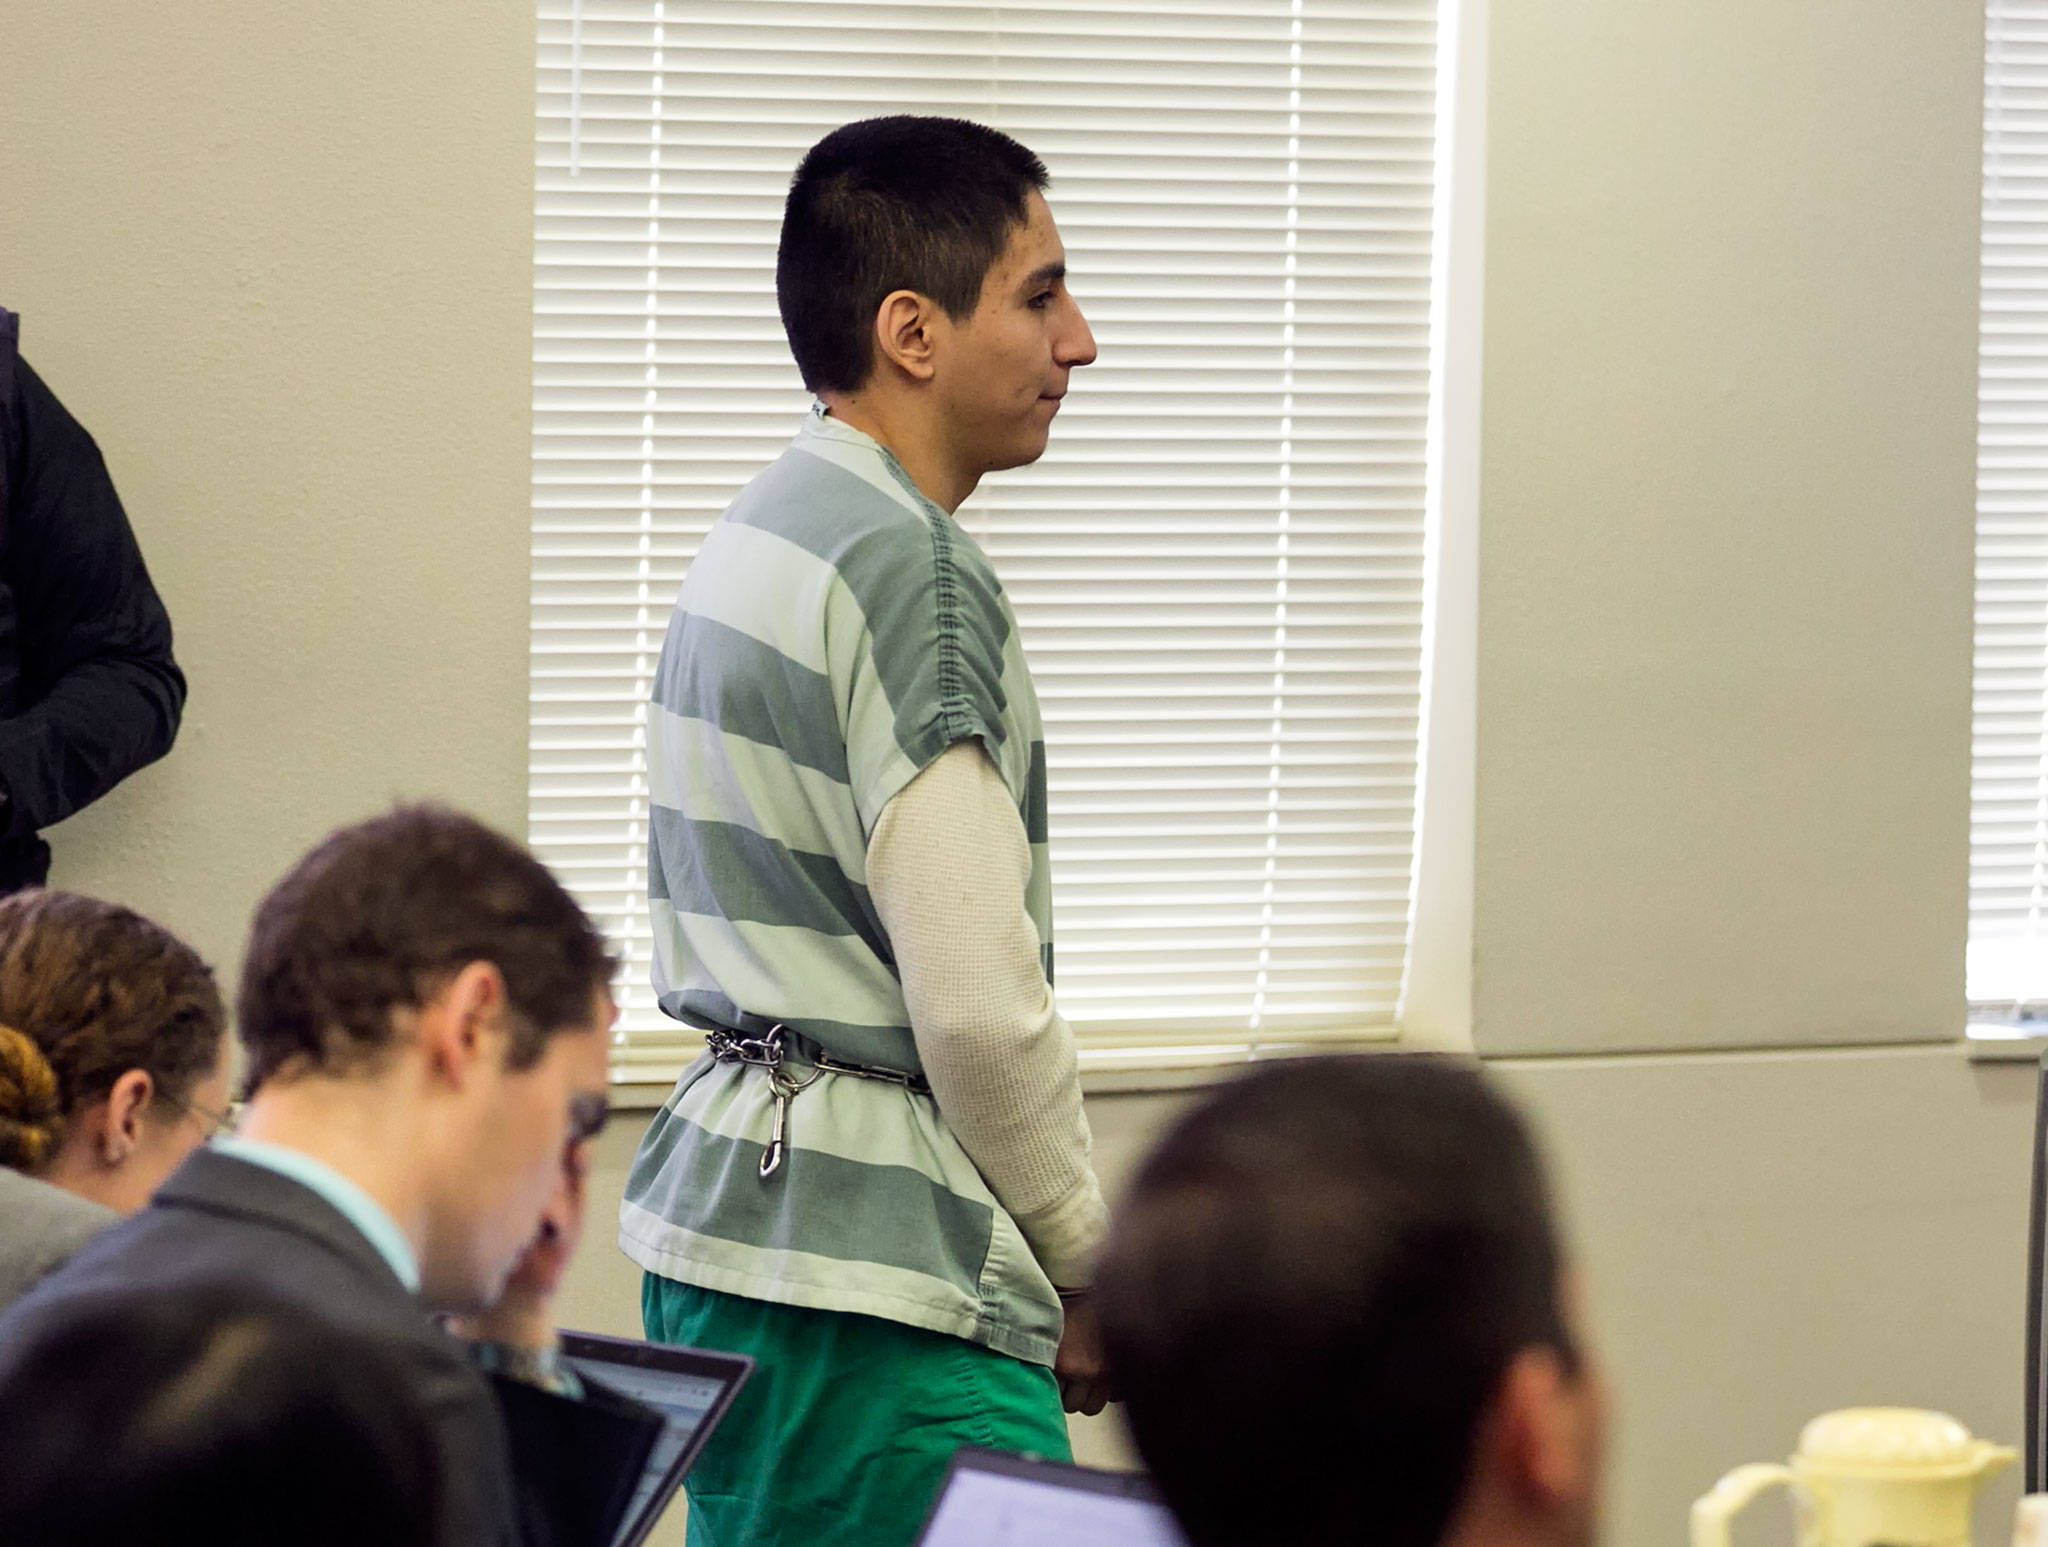 Brian Varela of Lynnwood pleaded guilty to manslaughter, rape and illegal disposal of remains in Snohomish County Superior Court Thursday, admitting he raped a teenager as she died of a drug overdose on September 20, 2018 (Kevin Clark / The Herald)